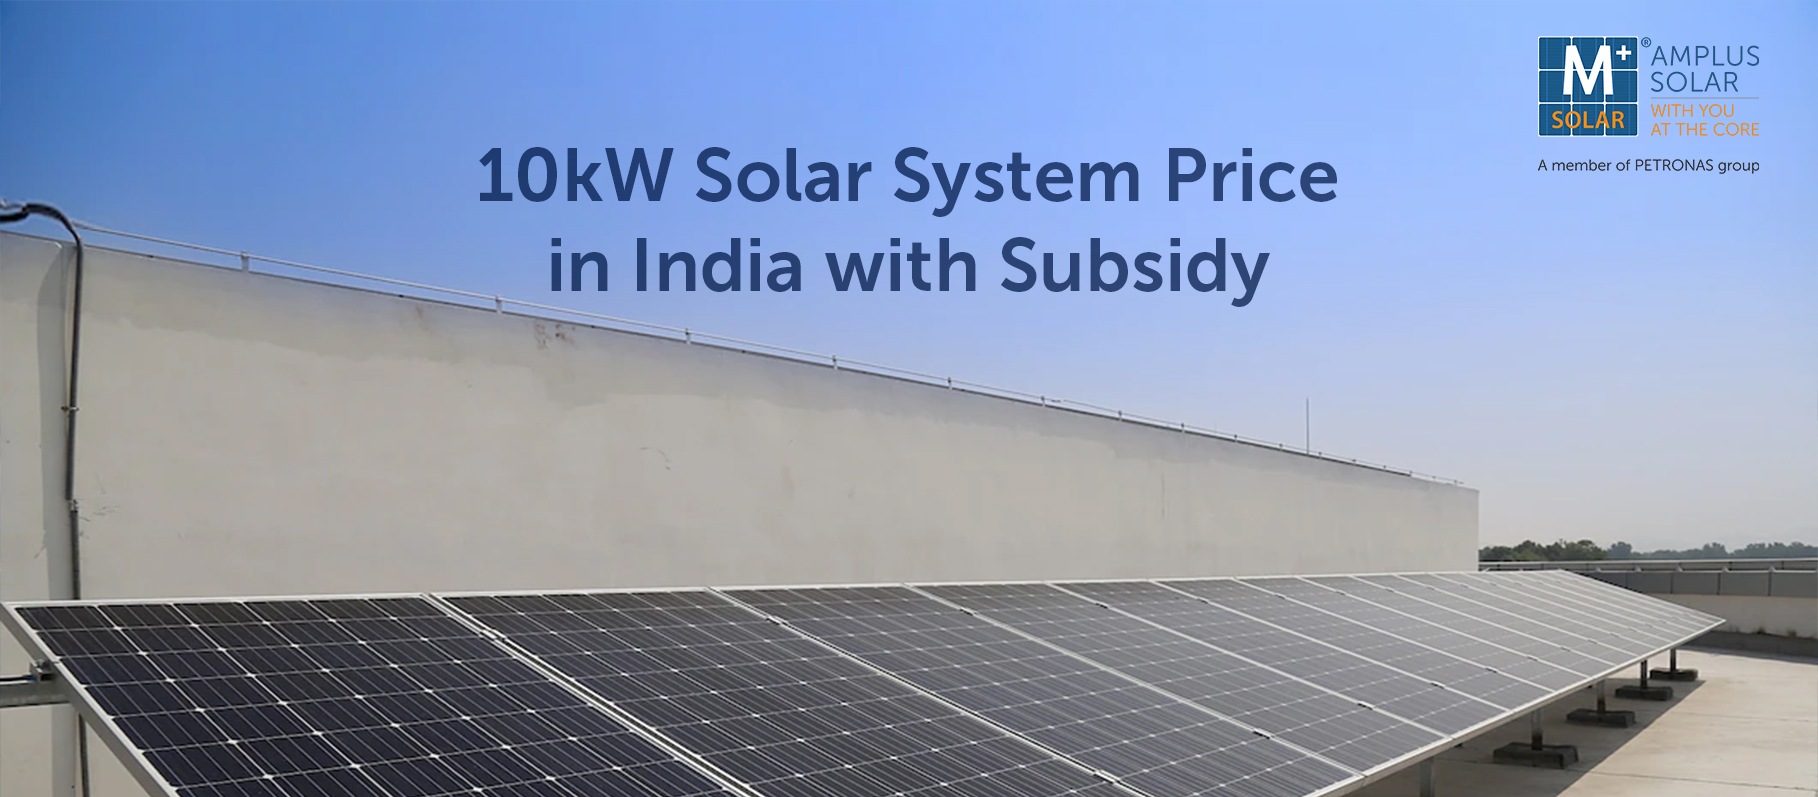 10kW Solar System Price in India with Subsidy